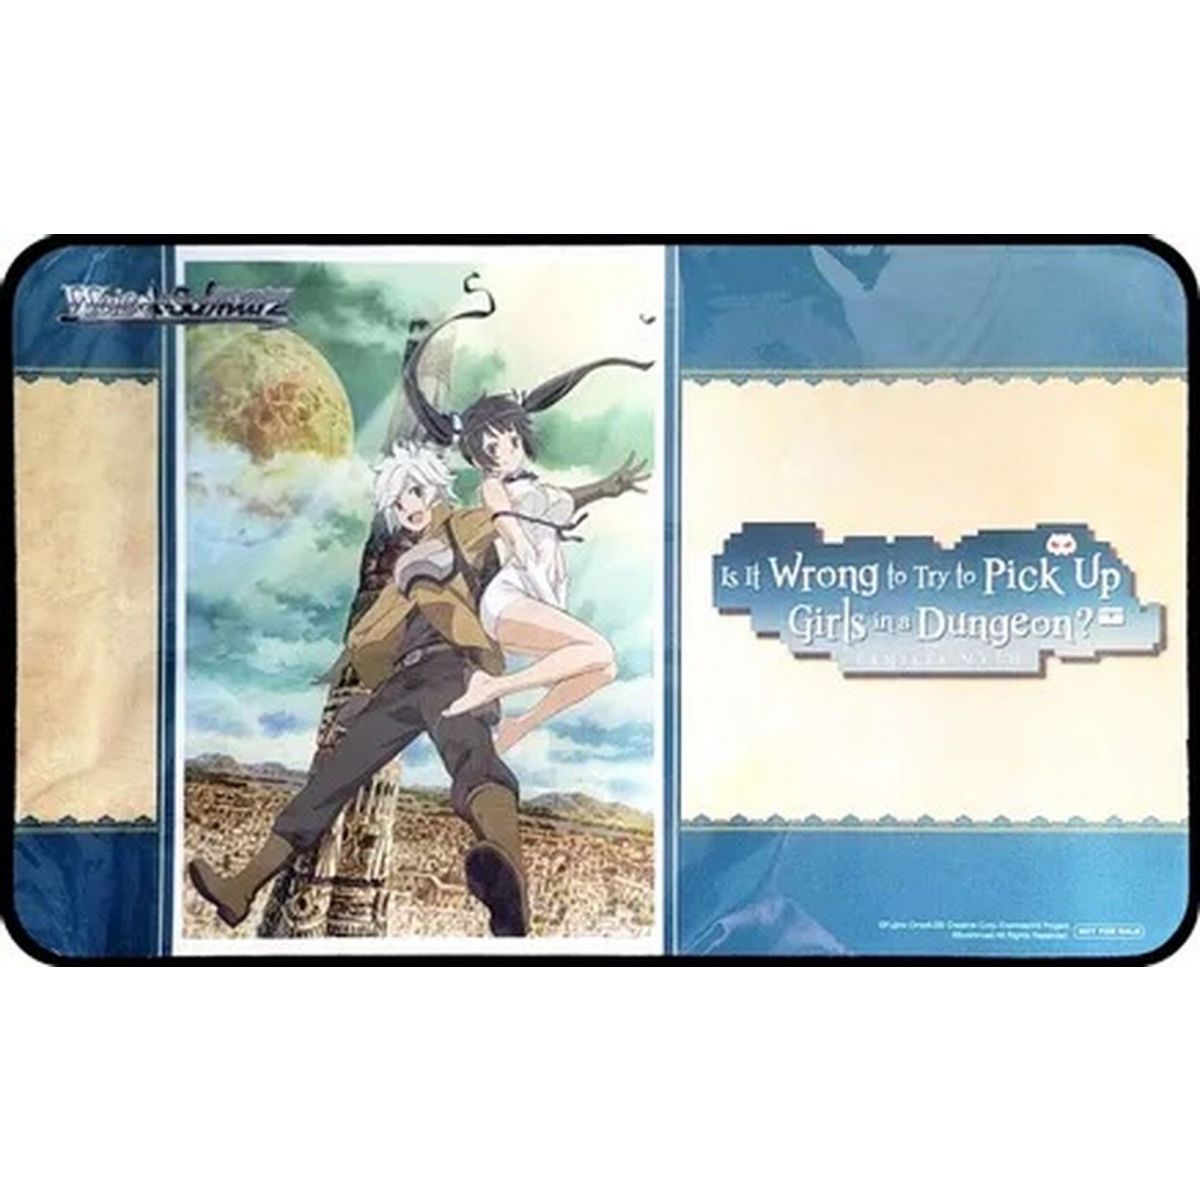 Weiss Schwarz - Playmat - Is It Wrong to Try to Pick Up Girls in a Dungeon? - Sealed